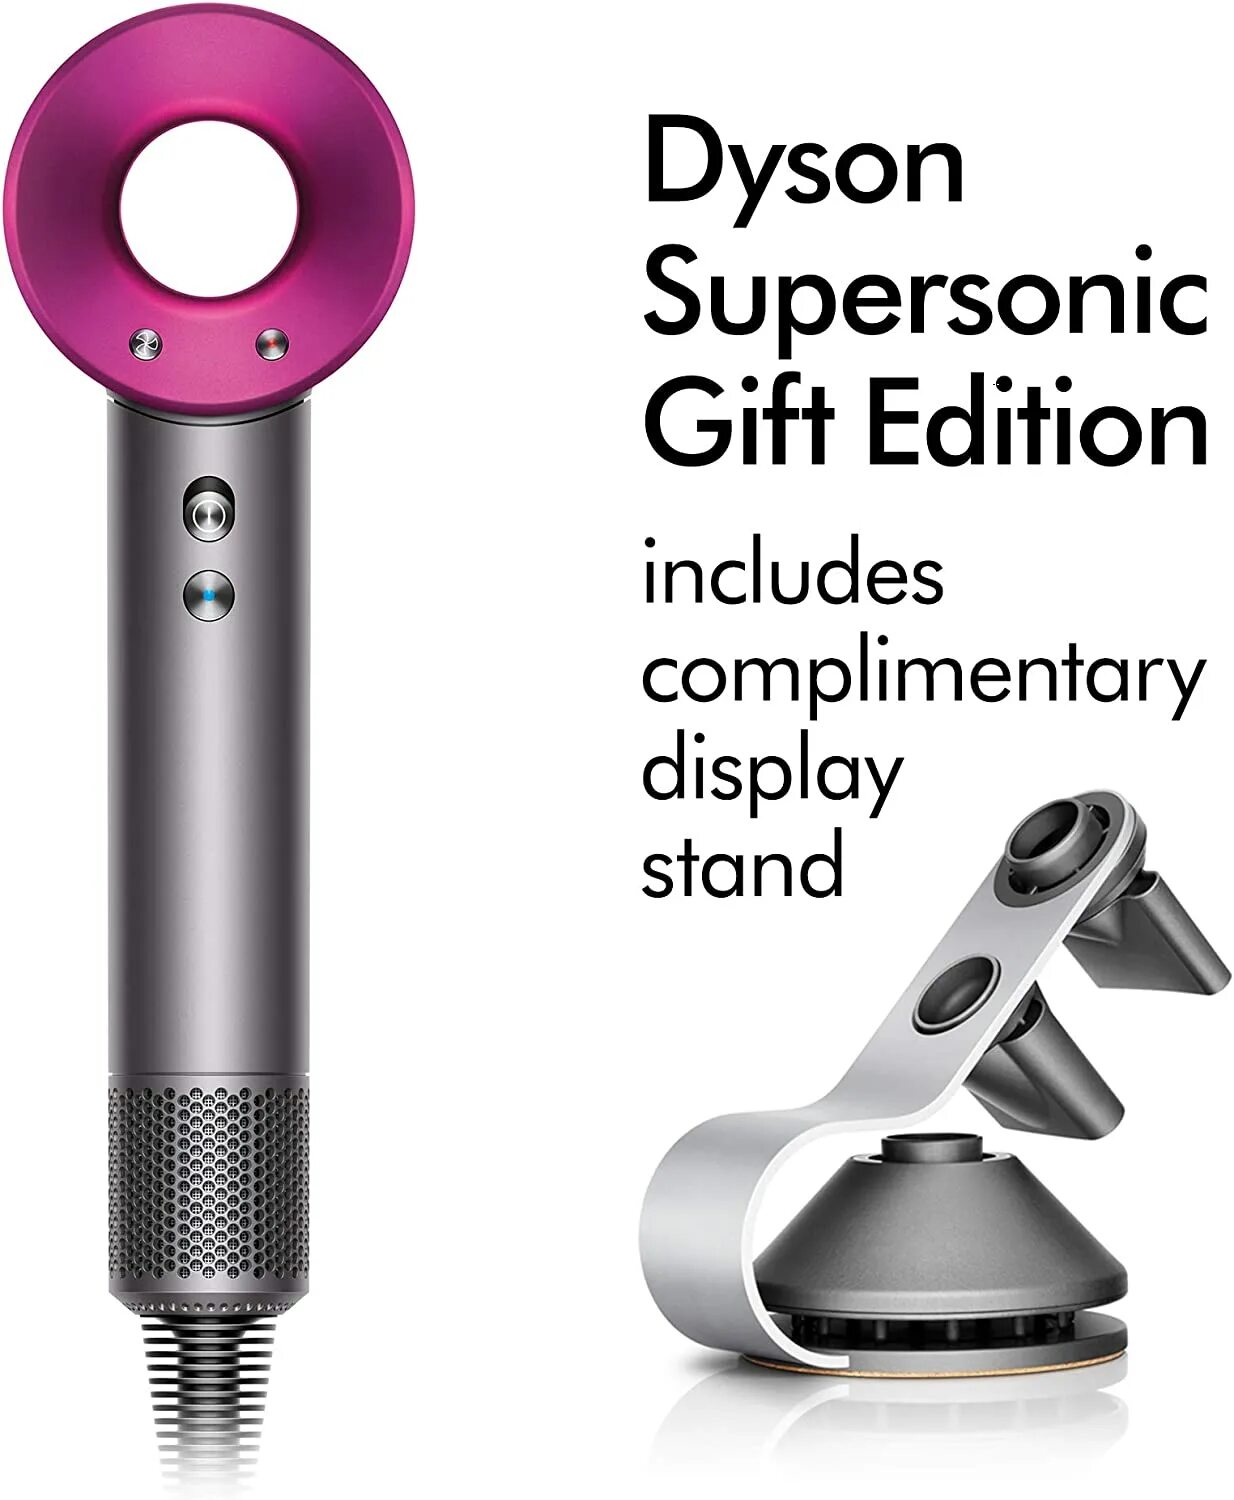 Фен Dyson Gift Edition. Dyson Supersonic. Asciugacapelli Dyson Supersonic. Dyson Supersonic hair Dryer.